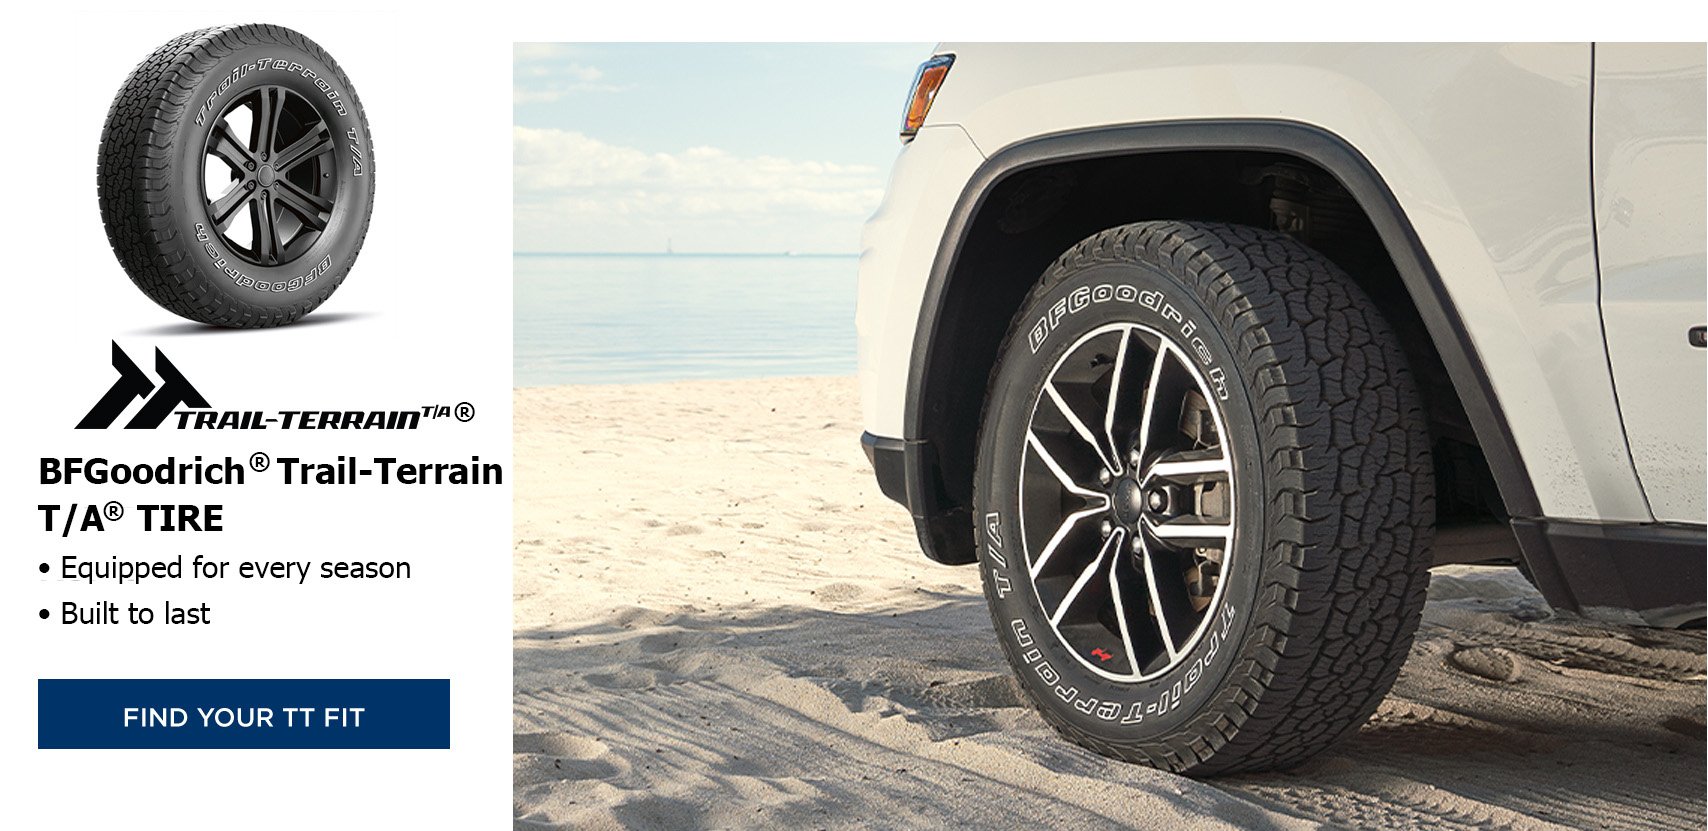 Check Out The All-New BFGoodrich Trail Terrain Tires